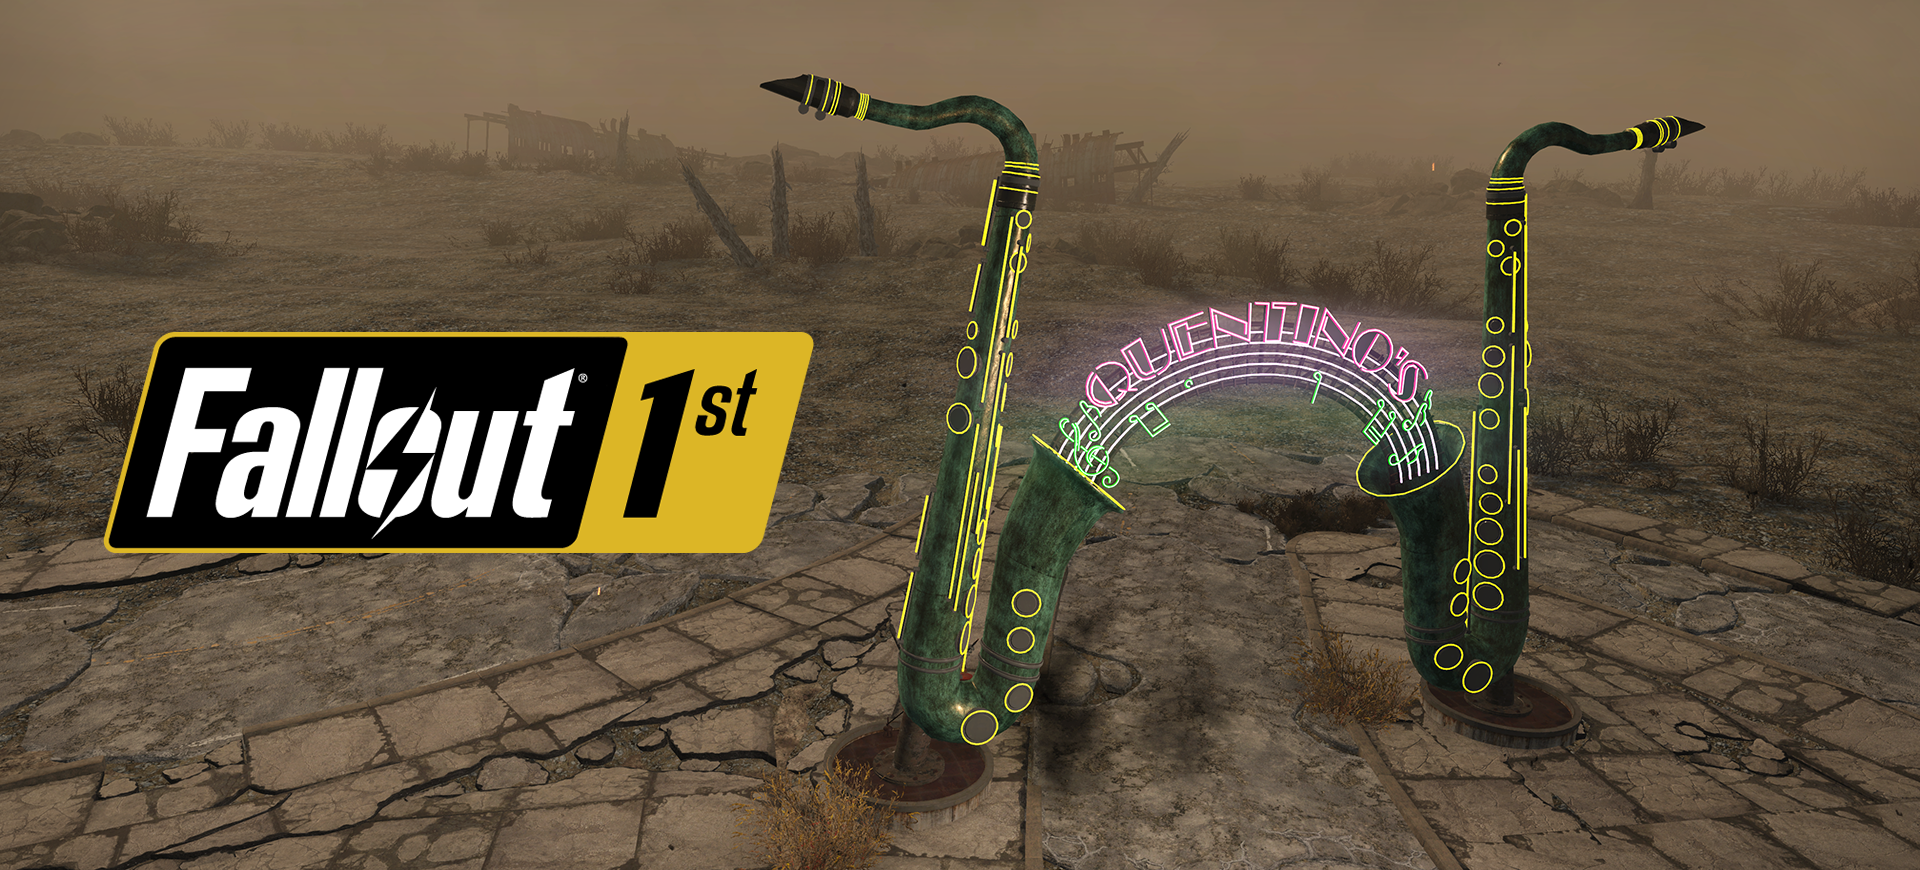 LHero Fallout1st Quentinos Saxophone